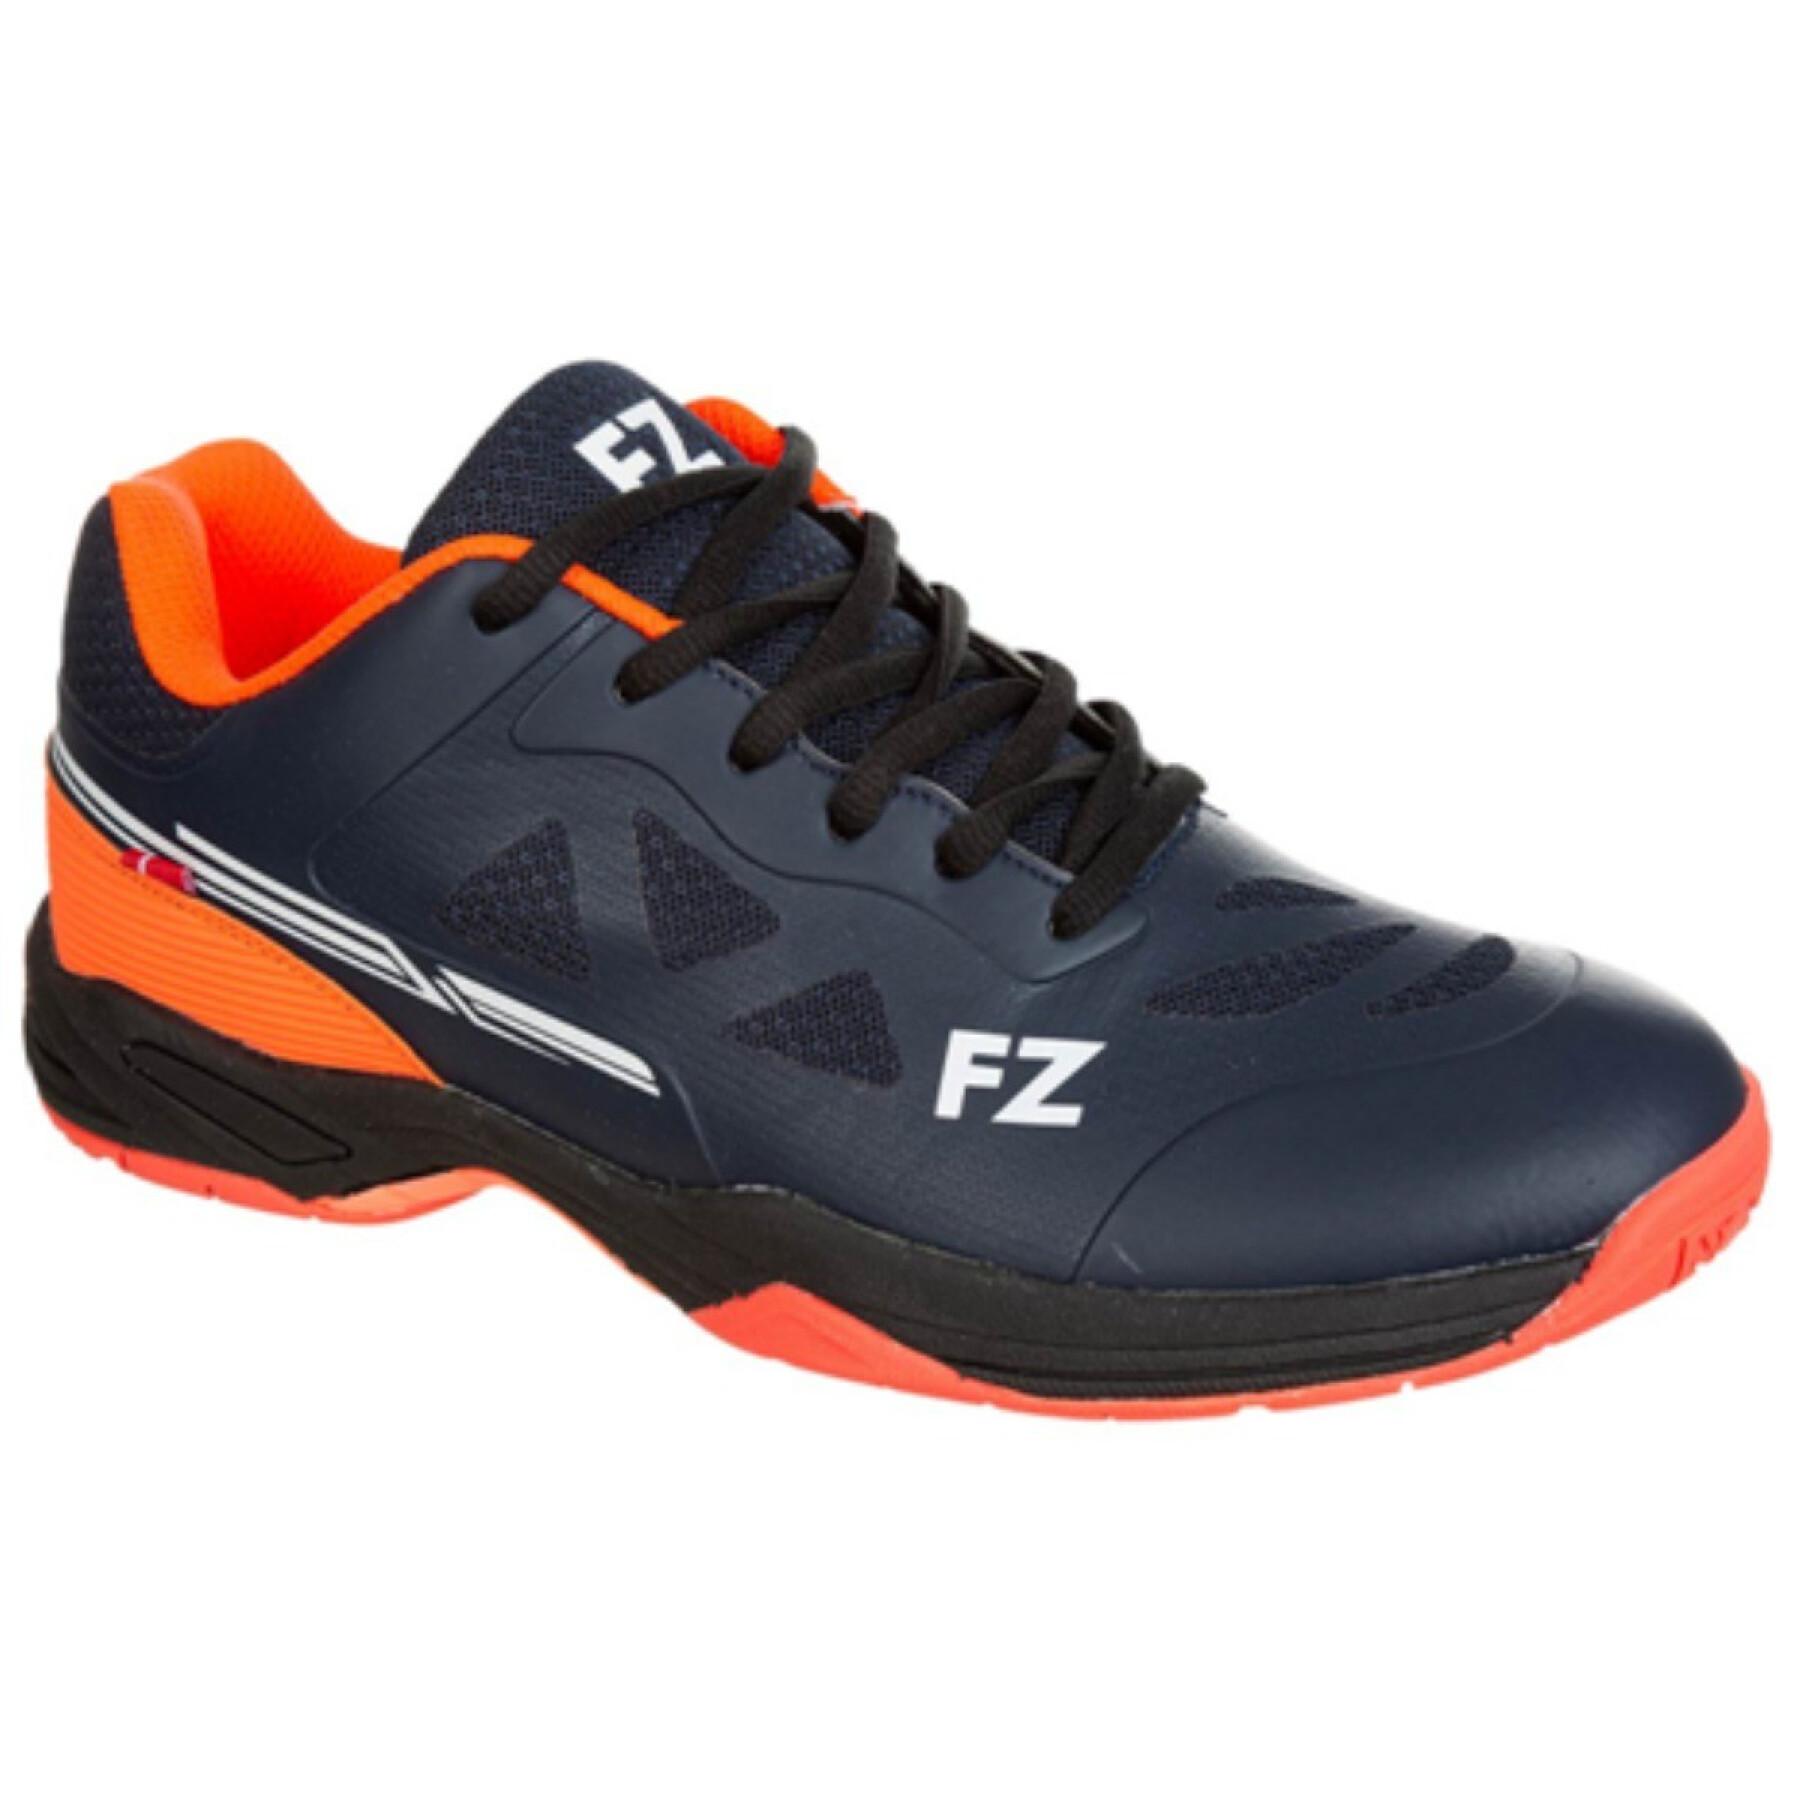 Indoor shoes FZ Forza Brace